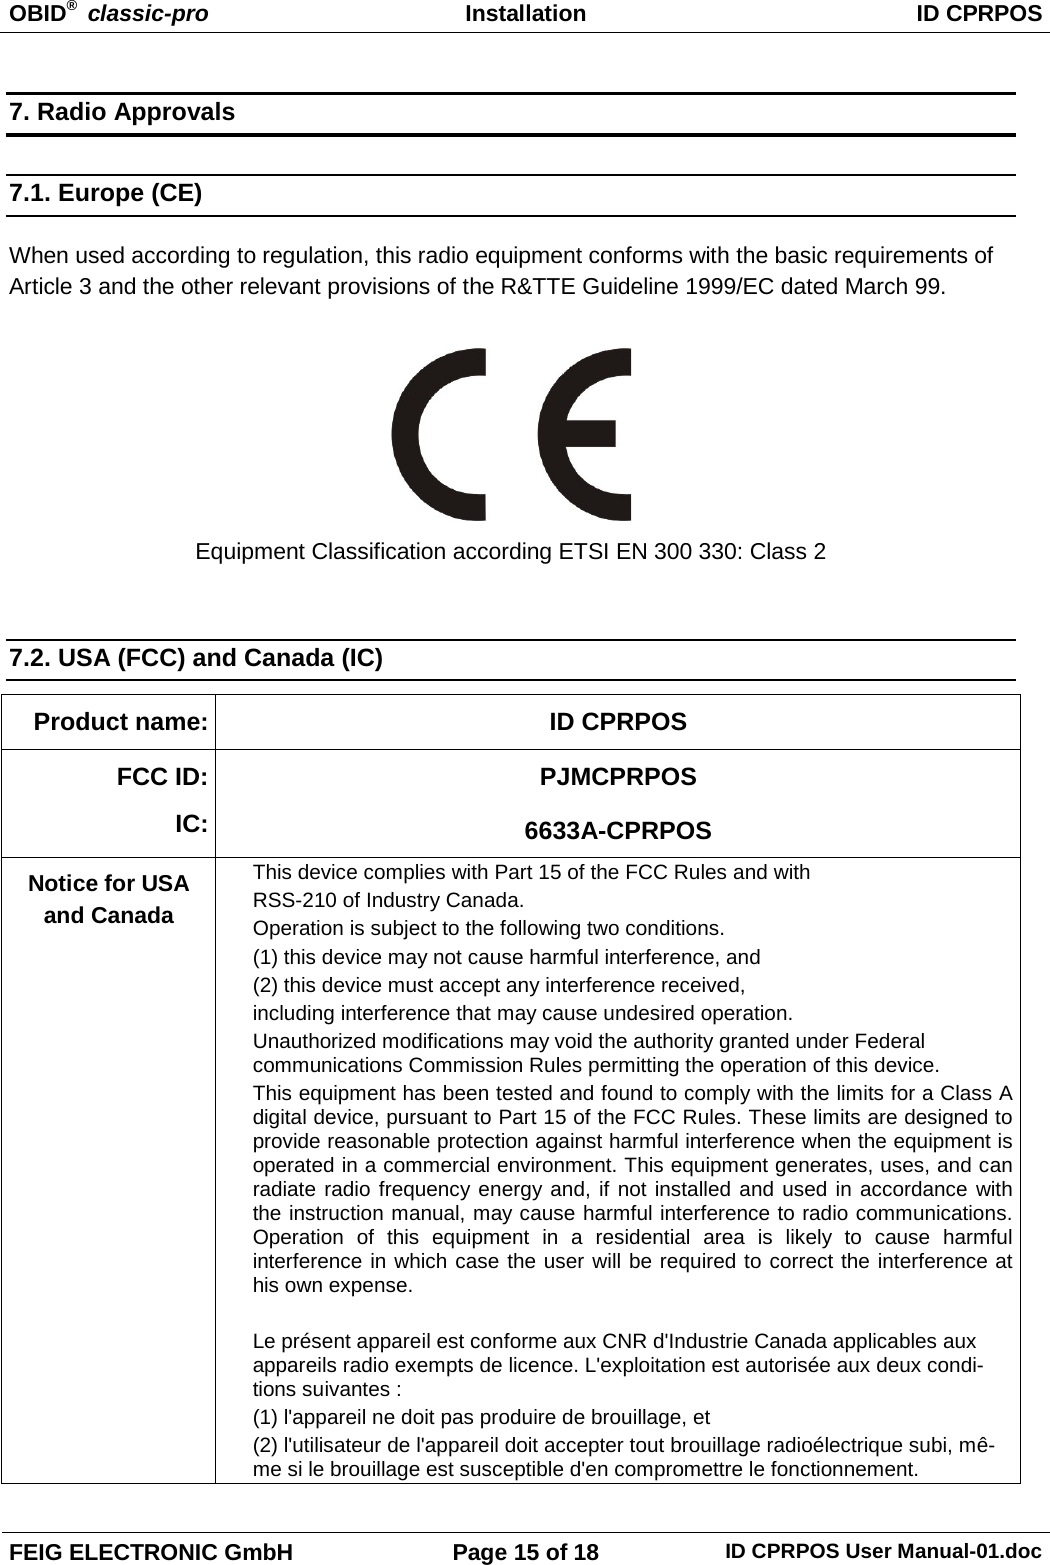 OBID®  classic-pro Installation ID CPRPOS  FEIG ELECTRONIC GmbH Page 15 of 18 ID CPRPOS User Manual-01.doc  7. Radio Approvals 7.1. Europe (CE) When used according to regulation, this radio equipment conforms with the basic requirements of Article 3 and the other relevant provisions of the R&amp;TTE Guideline 1999/EC dated March 99.   Equipment Classification according ETSI EN 300 330: Class 2  7.2. USA (FCC) and Canada (IC) Product name: ID CPRPOS FCC ID: IC: PJMCPRPOS 6633A-CPRPOS Notice for USA and Canada This device complies with Part 15 of the FCC Rules and with RSS-210 of Industry Canada. Operation is subject to the following two conditions.  (1) this device may not cause harmful interference, and  (2) this device must accept any interference received,  including interference that may cause undesired operation. Unauthorized modifications may void the authority granted under Federal communications Commission Rules permitting the operation of this device. This equipment has been tested and found to comply with the limits for a Class A digital device, pursuant to Part 15 of the FCC Rules. These limits are designed to provide reasonable protection against harmful interference when the equipment is operated in a commercial environment. This equipment generates, uses, and can radiate radio frequency energy and, if not installed and used in accordance with the instruction manual, may cause harmful interference to radio communications. Operation of this equipment in a residential area is likely to cause harmful interference in which case the user will be required to correct the interference at his own expense.  Le présent appareil est conforme aux CNR d&apos;Industrie Canada applicables aux appareils radio exempts de licence. L&apos;exploitation est autorisée aux deux condi-tions suivantes :  (1) l&apos;appareil ne doit pas produire de brouillage, et  (2) l&apos;utilisateur de l&apos;appareil doit accepter tout brouillage radioélectrique subi, mê-me si le brouillage est susceptible d&apos;en compromettre le fonctionnement. 